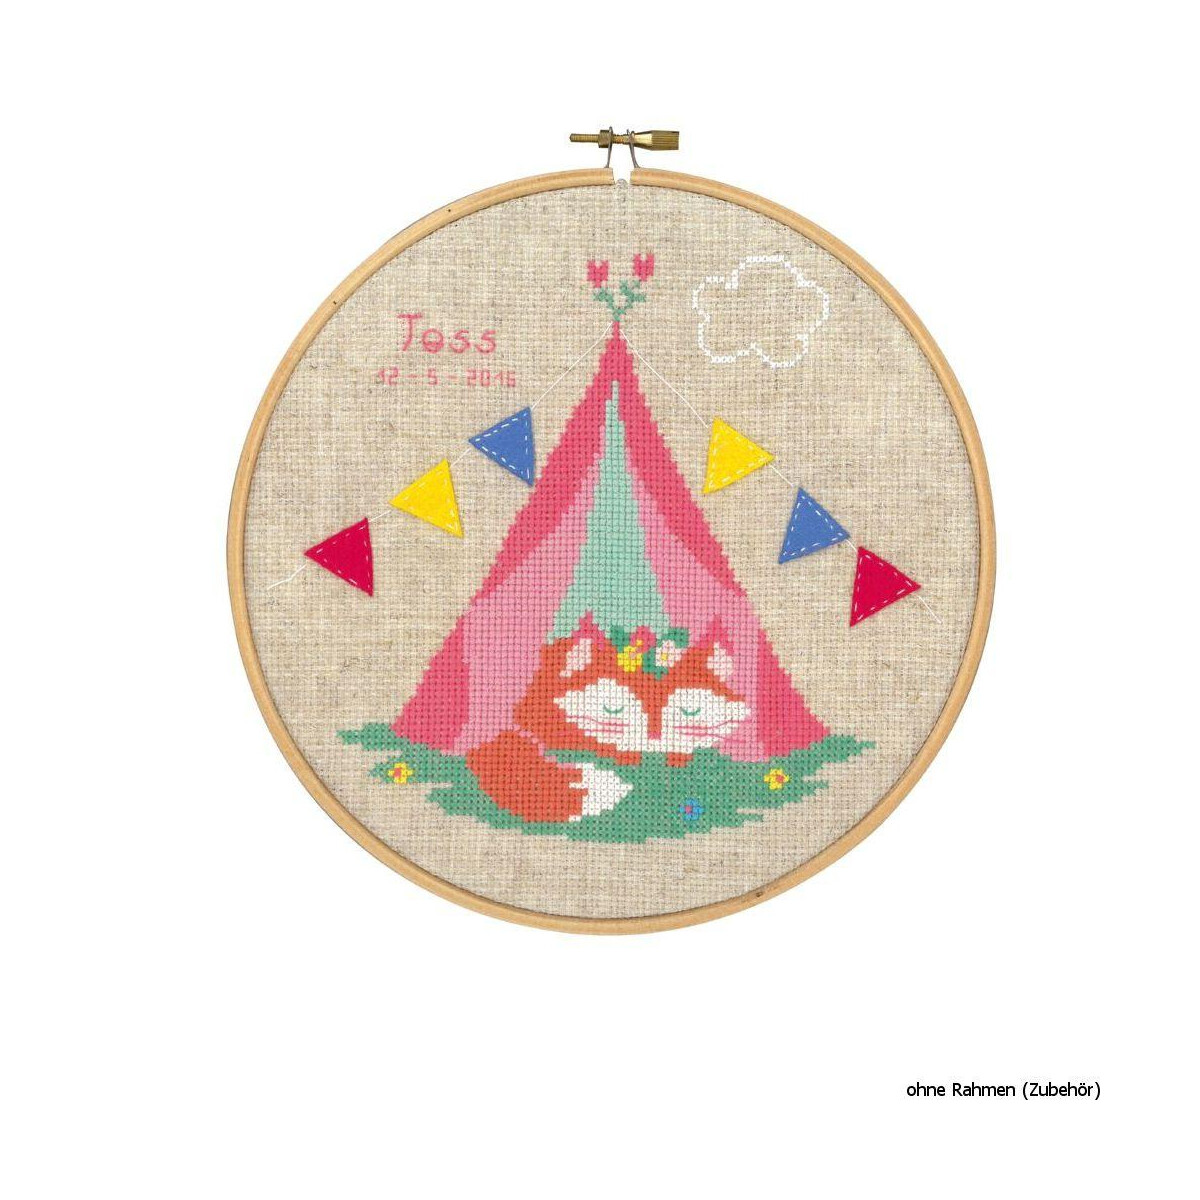 Vervaco cross stitch kit with Hoop counted "Fox in...